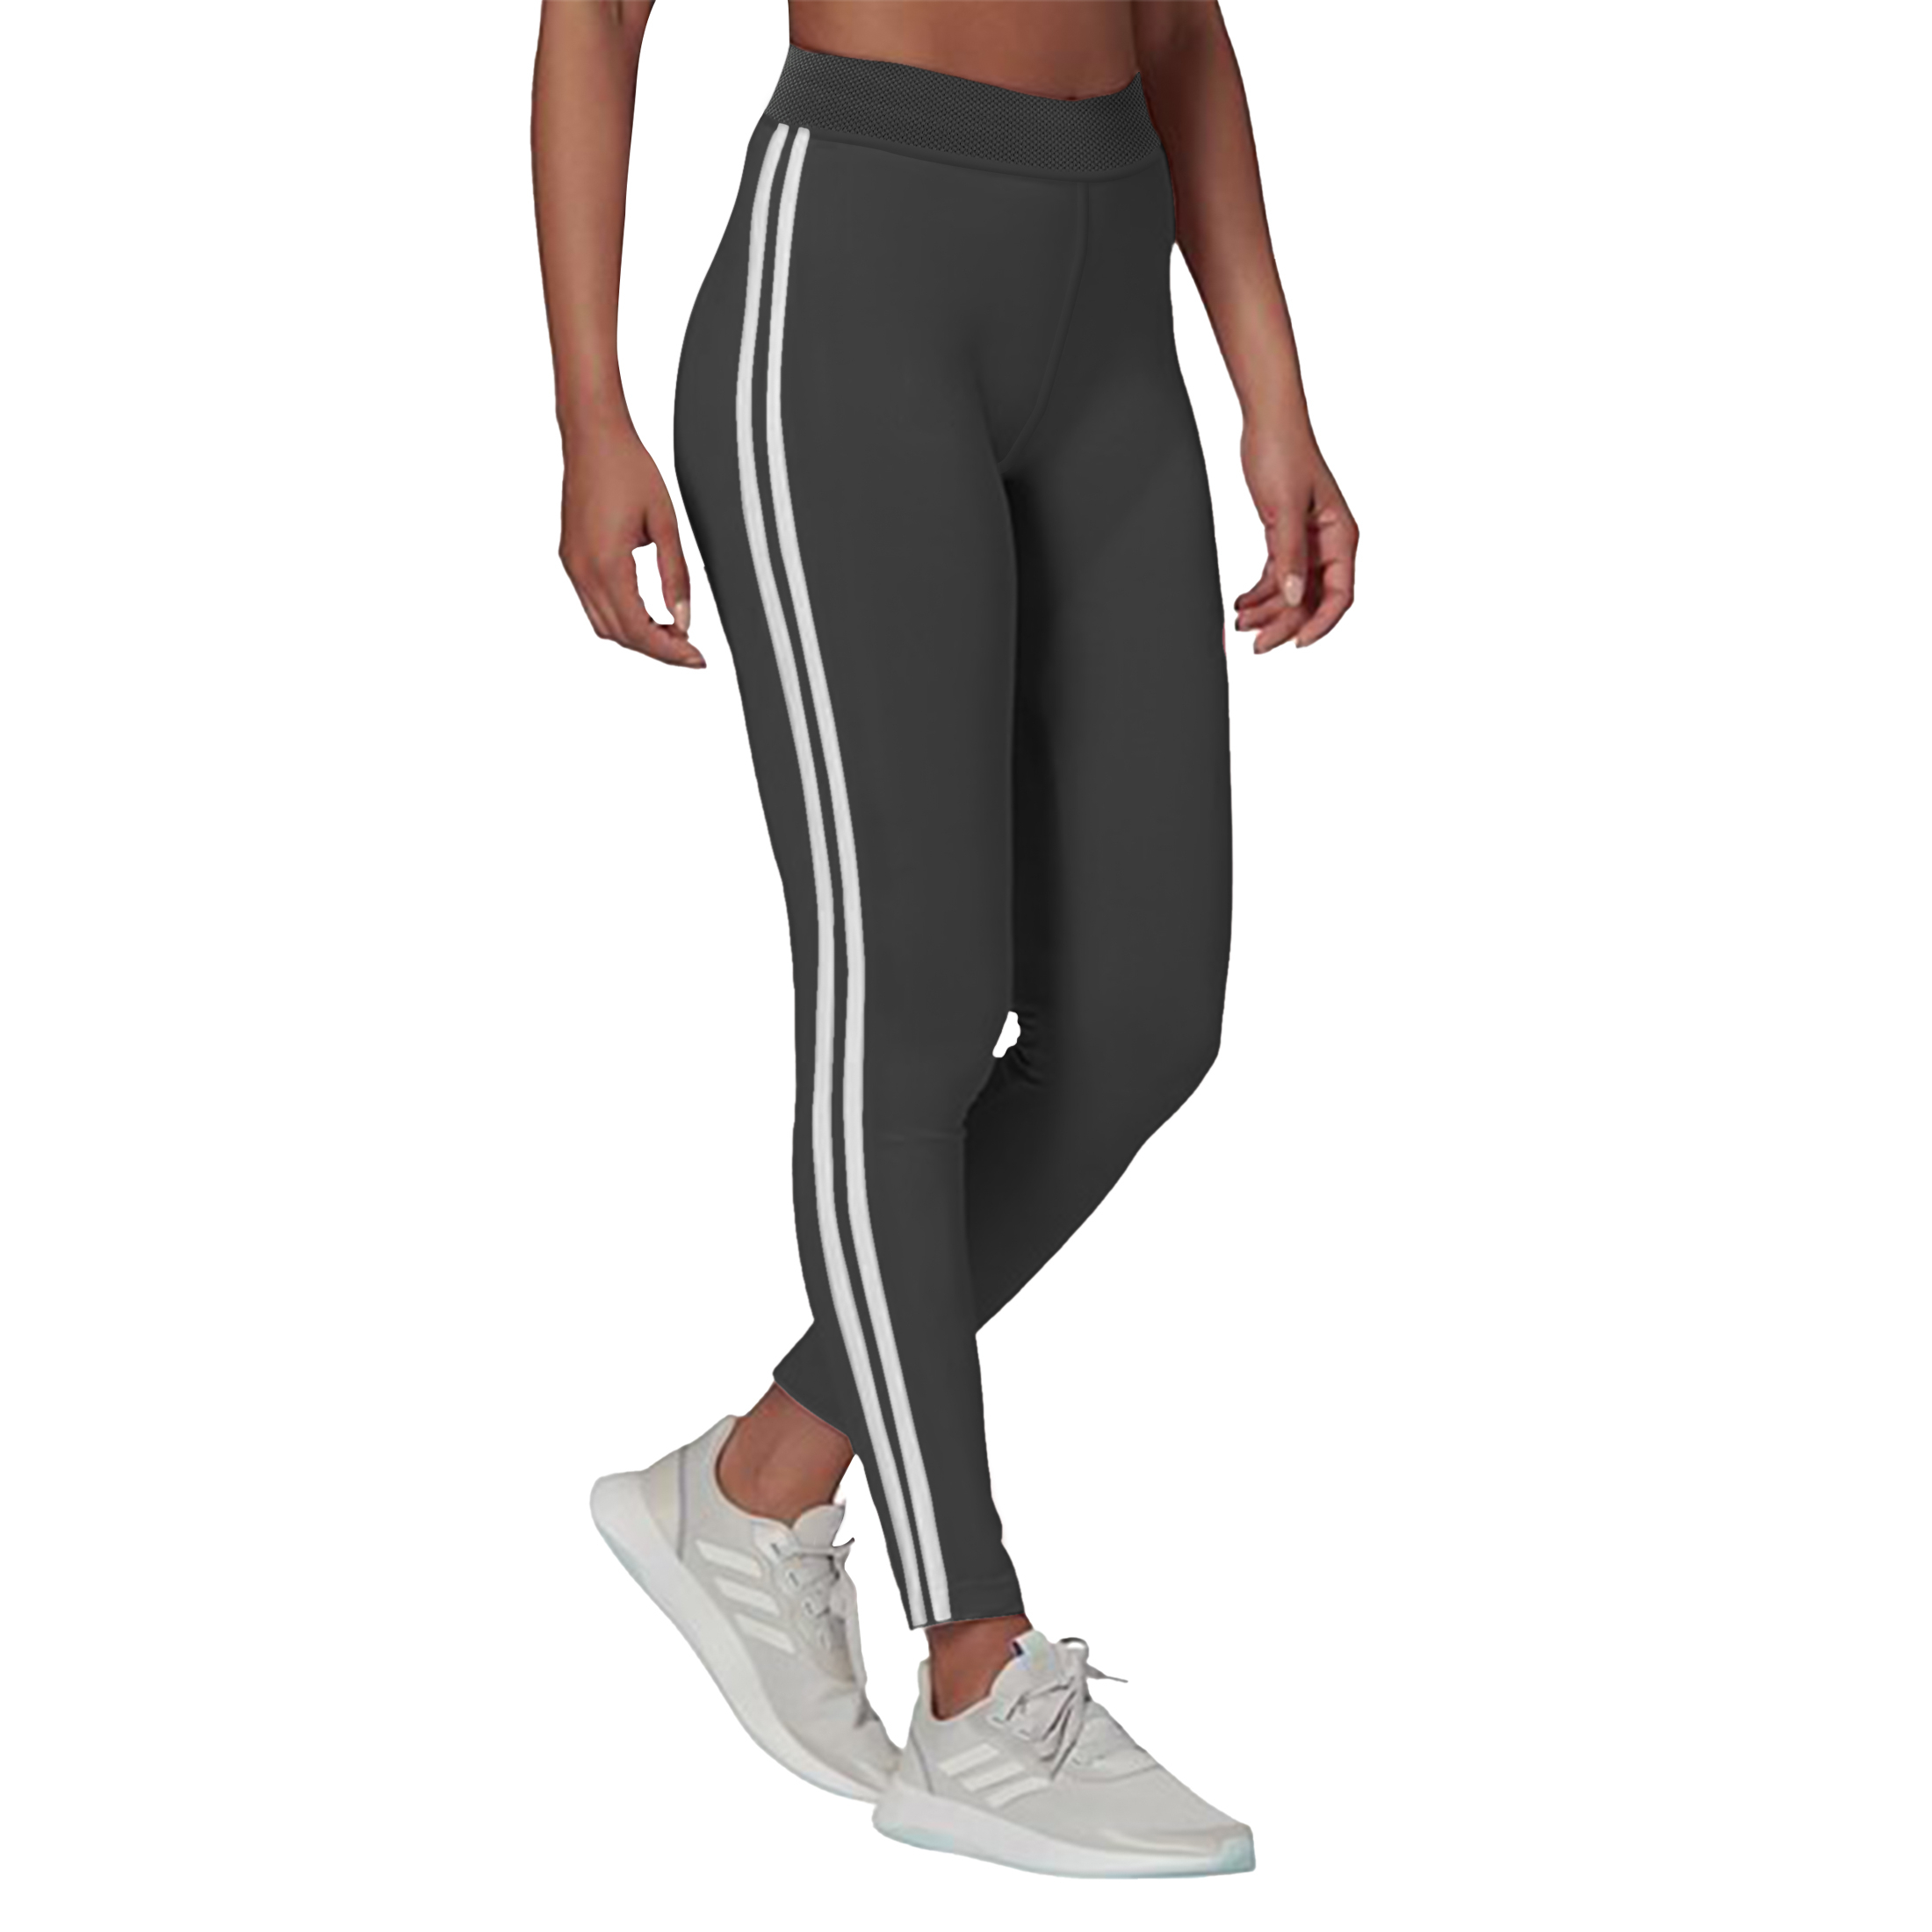 3-Pack: Women's Striped Fleece-Lined High Waisted Workout Yoga Leggings - Large/X-Large